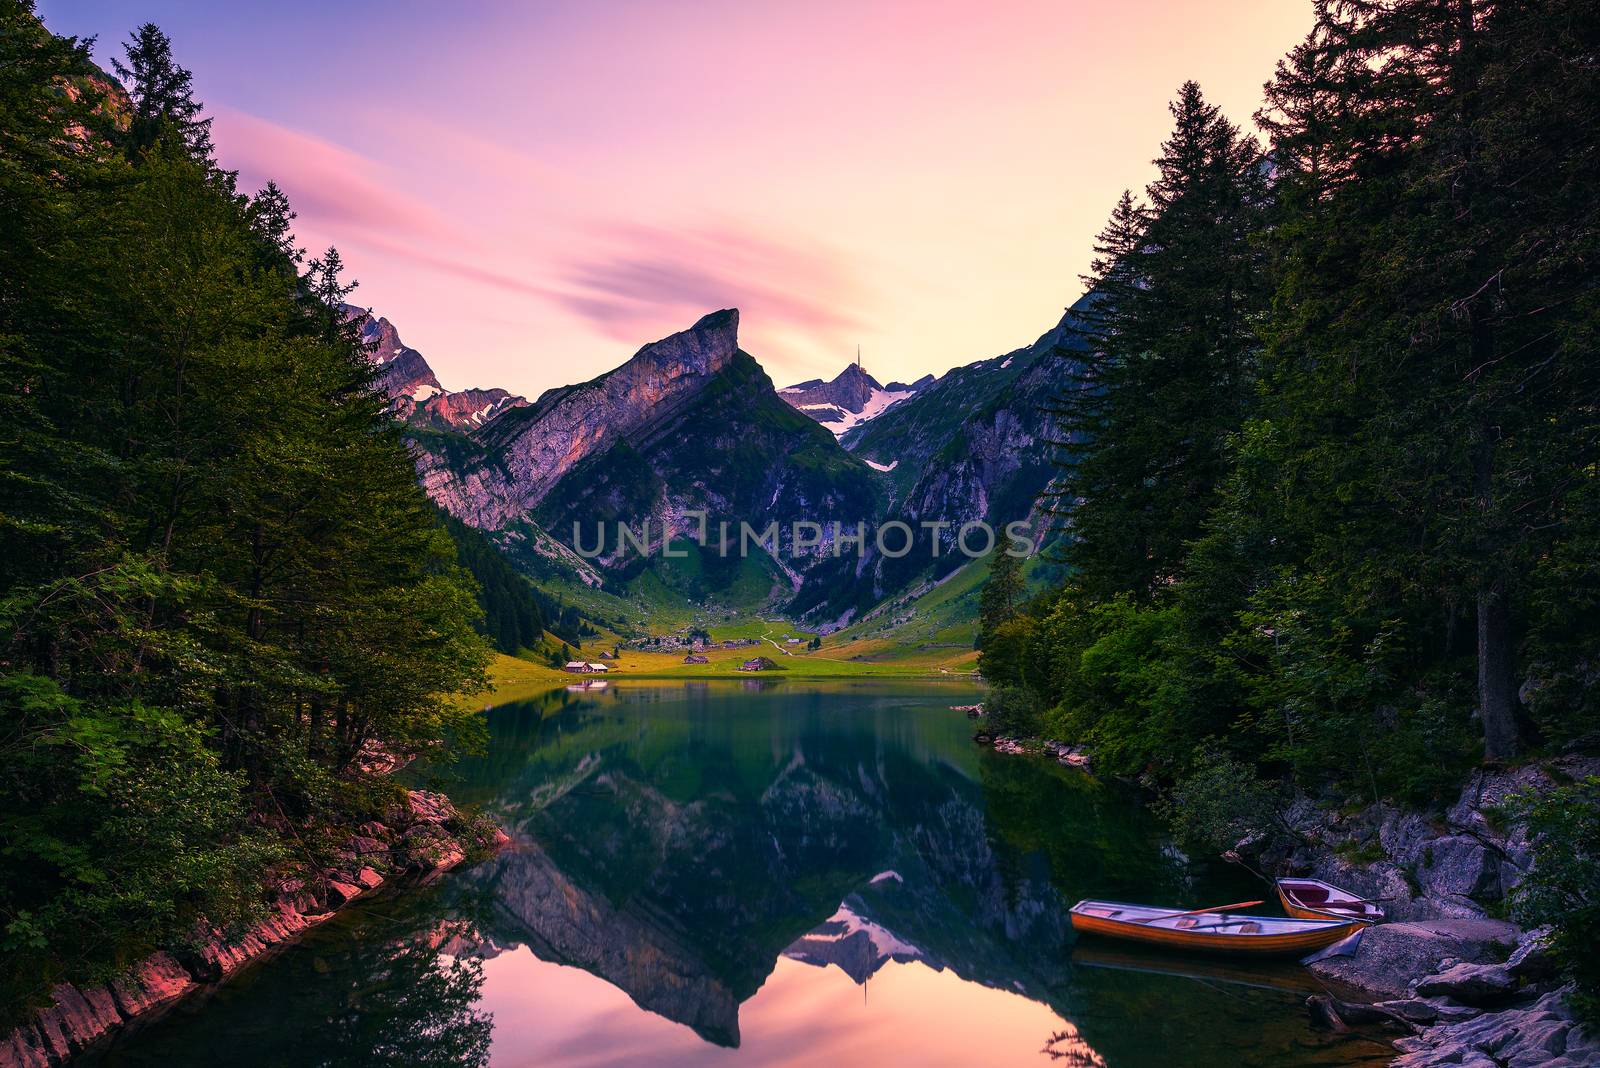 Sunset over the Seealpsee lake and the Grenzchopf mountain in the Appenzell region of Swiss Alps, Switzerland, with small boats in the foreground. Long exposure.